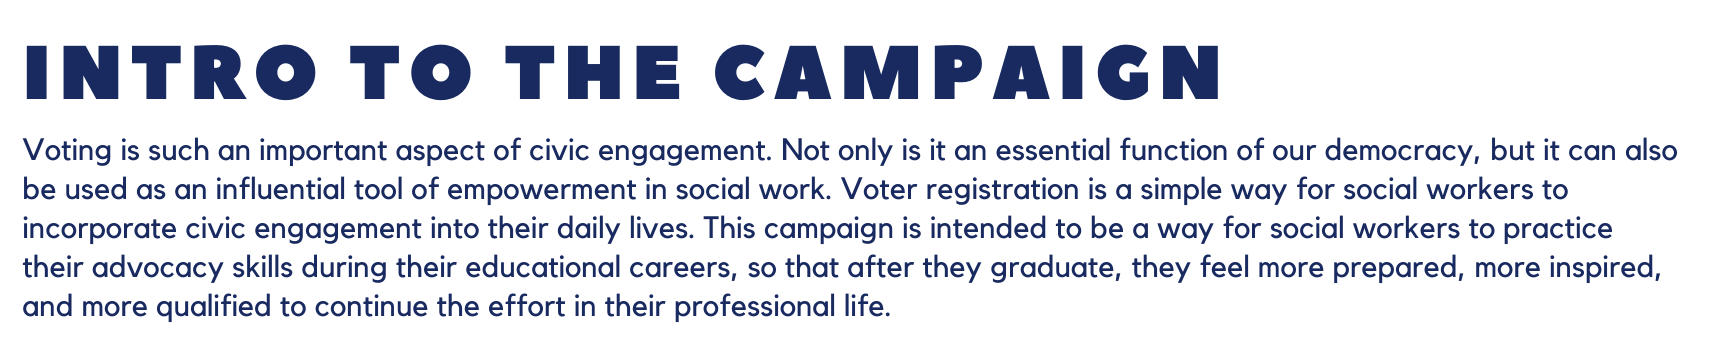 Intro to the Campaign: Voting is such an important aspect of civic engagement. Not only is it an essential function of our democracy, but it can also be used as an influential tool of empowerment in social work. Voter registration is a simple way for social workers to incorporate civic engagement into their daily lives. This campaign is intended to be a way for social workers to practice their advocacy skills during their educational careers, so that after they graduate, they feel more prepared, more inspired, and more qualified to continue the effort in their professional life.